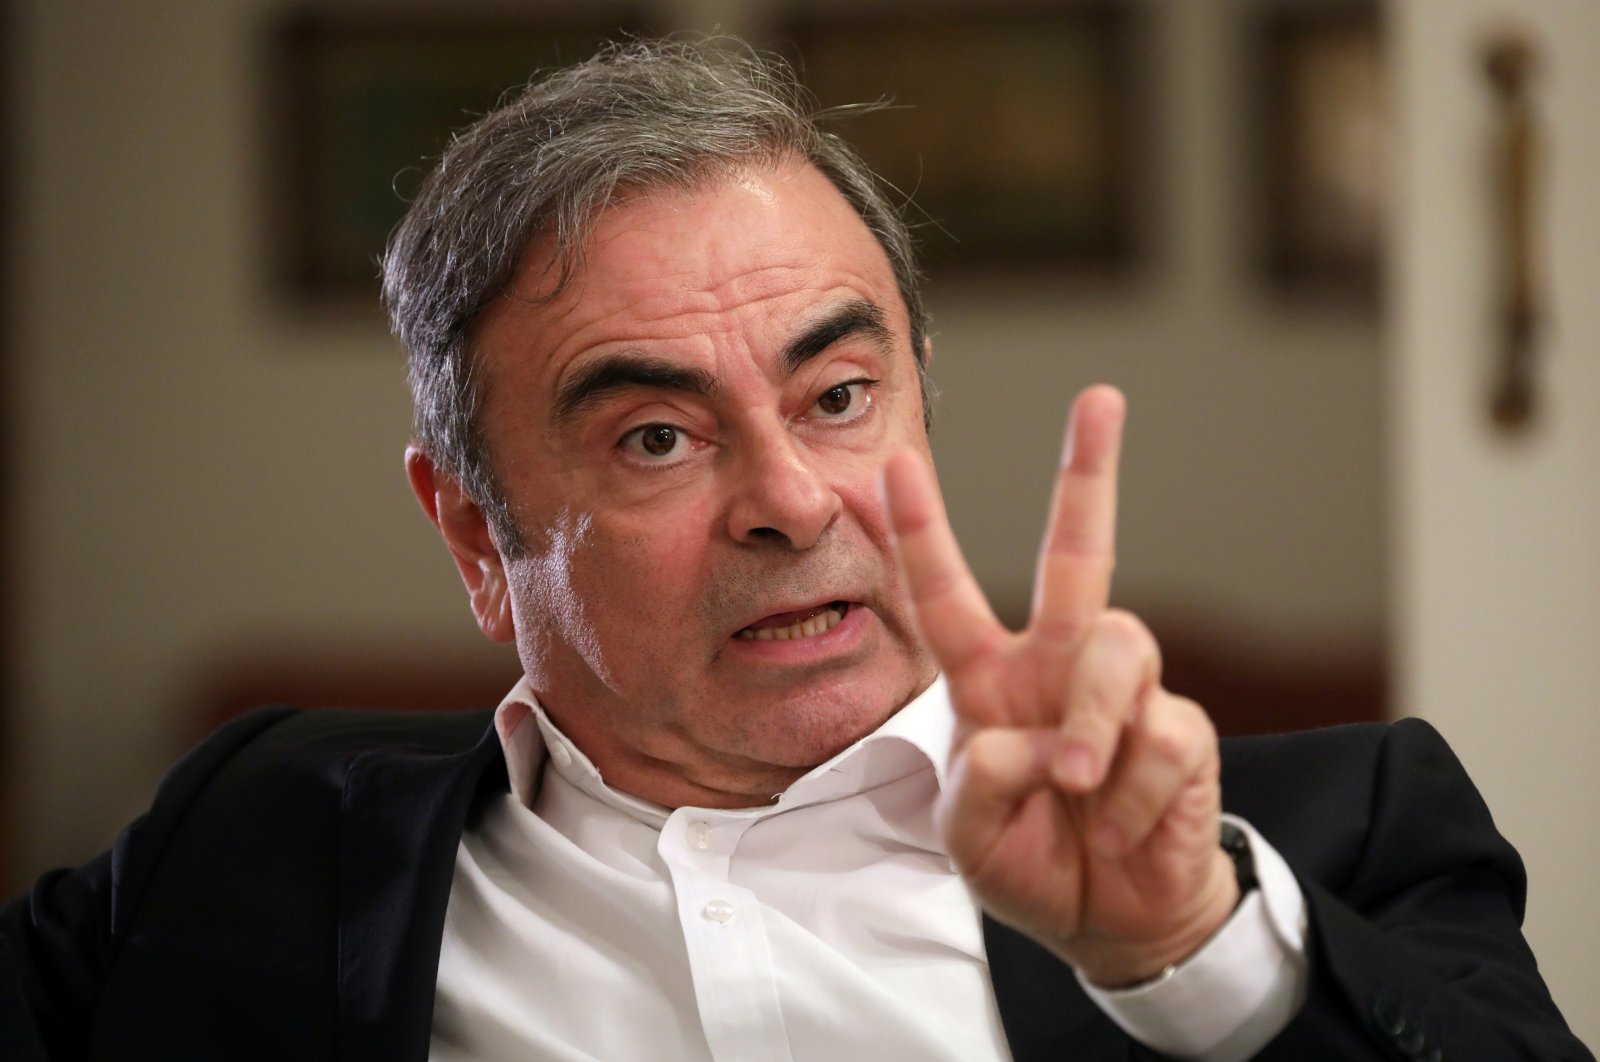 Former Nissan chairman Carlos Ghosn talks during an interview with Reuters in Beirut, Lebanon, Jan. 14, 2020. (Reuters Photo)